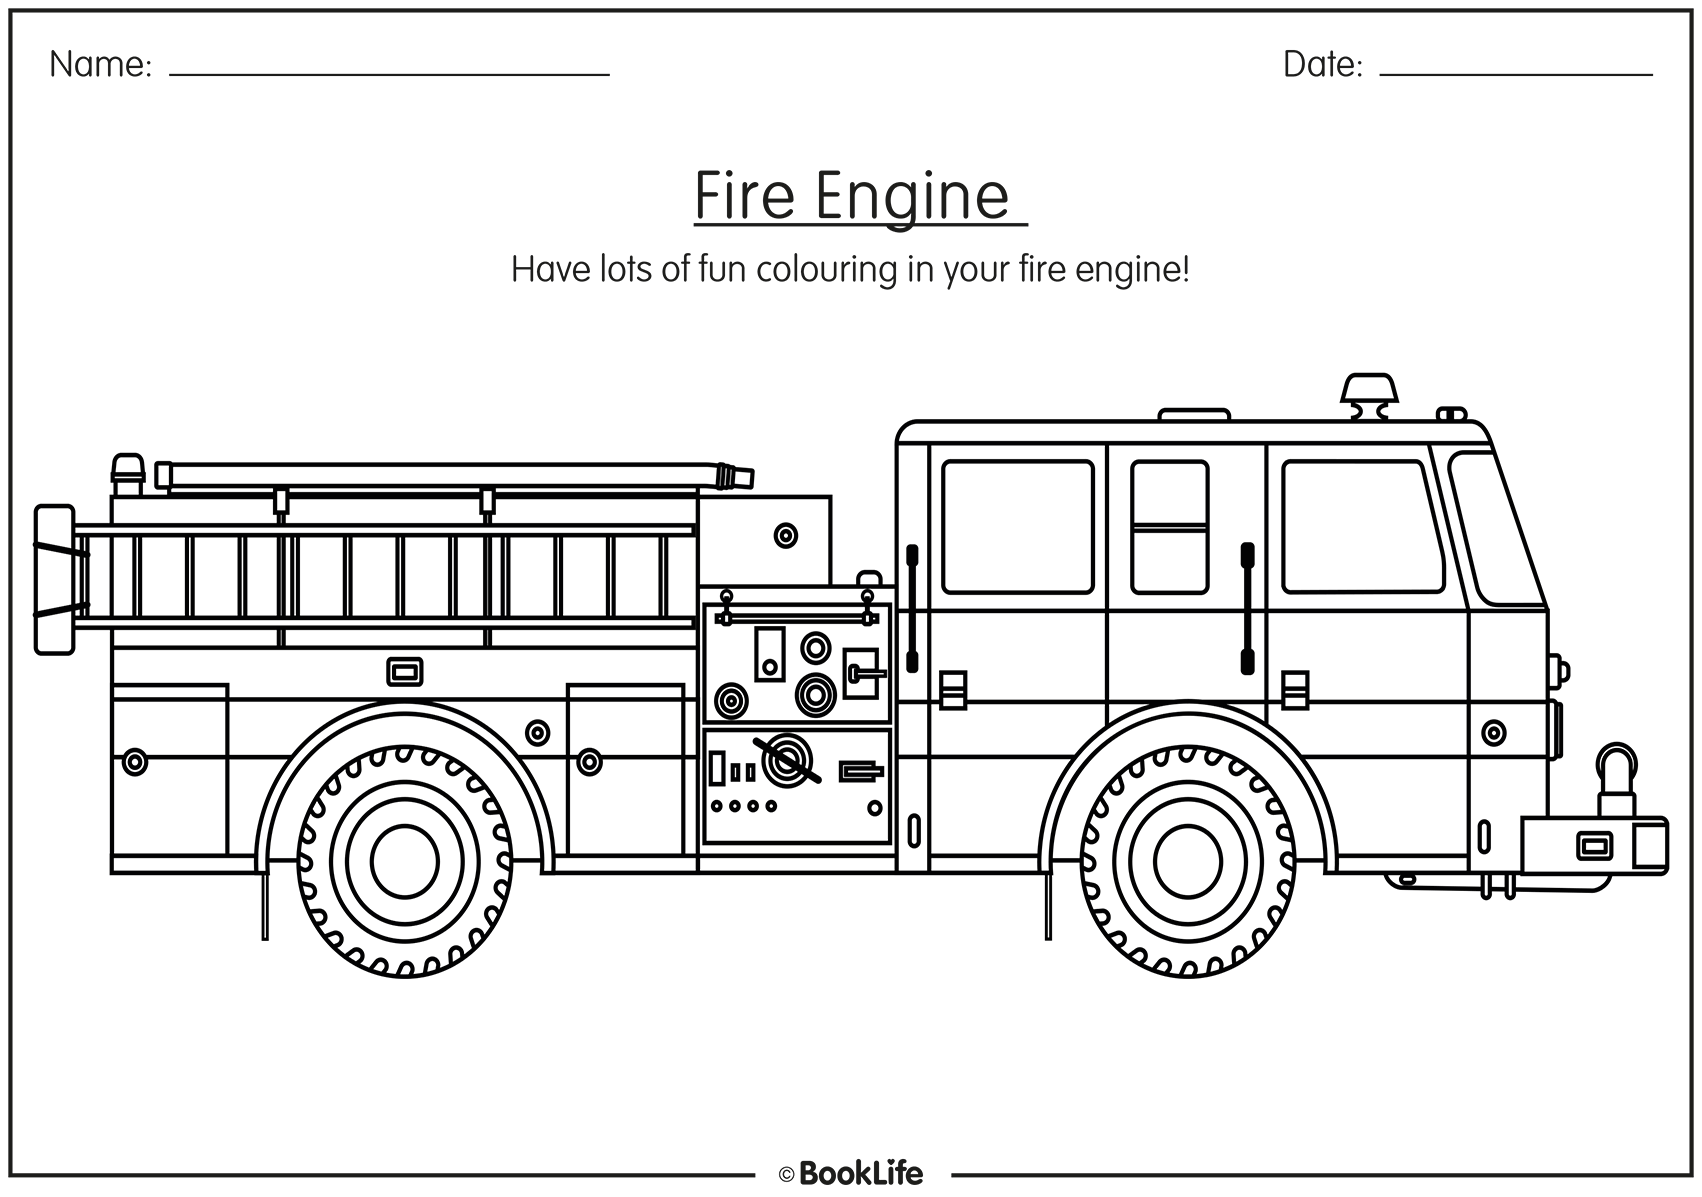 Colouring In Fire Engine by BookLife